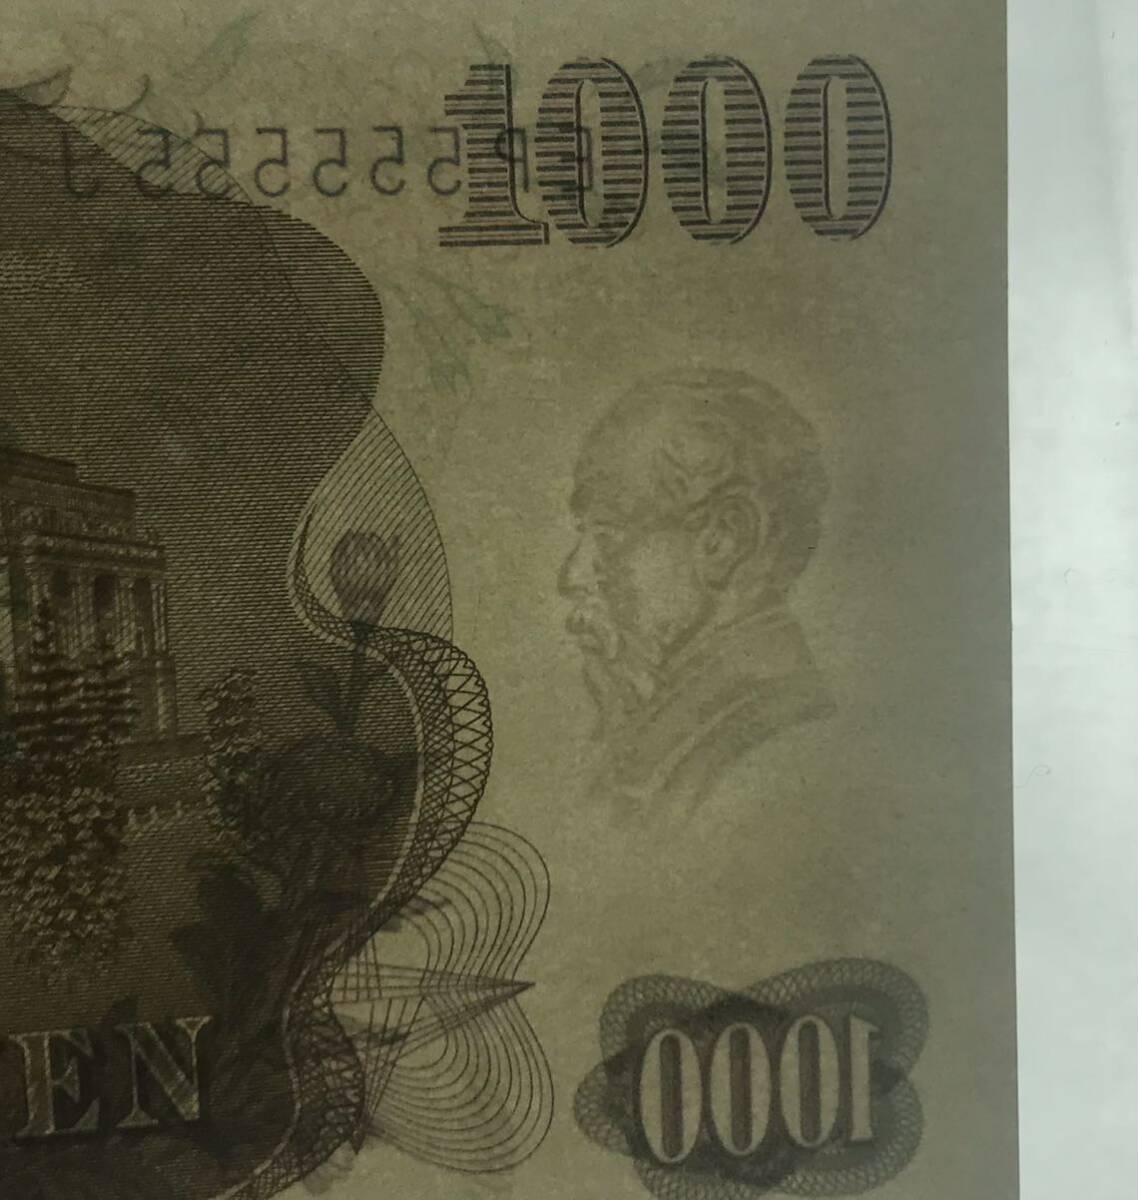 #* note *. wistaria . writing zoro eyes pin . thousand jpy .EP555555J. number rare Japan Bank ticket face value 1000 jpy *okoy2613790-246*p6158